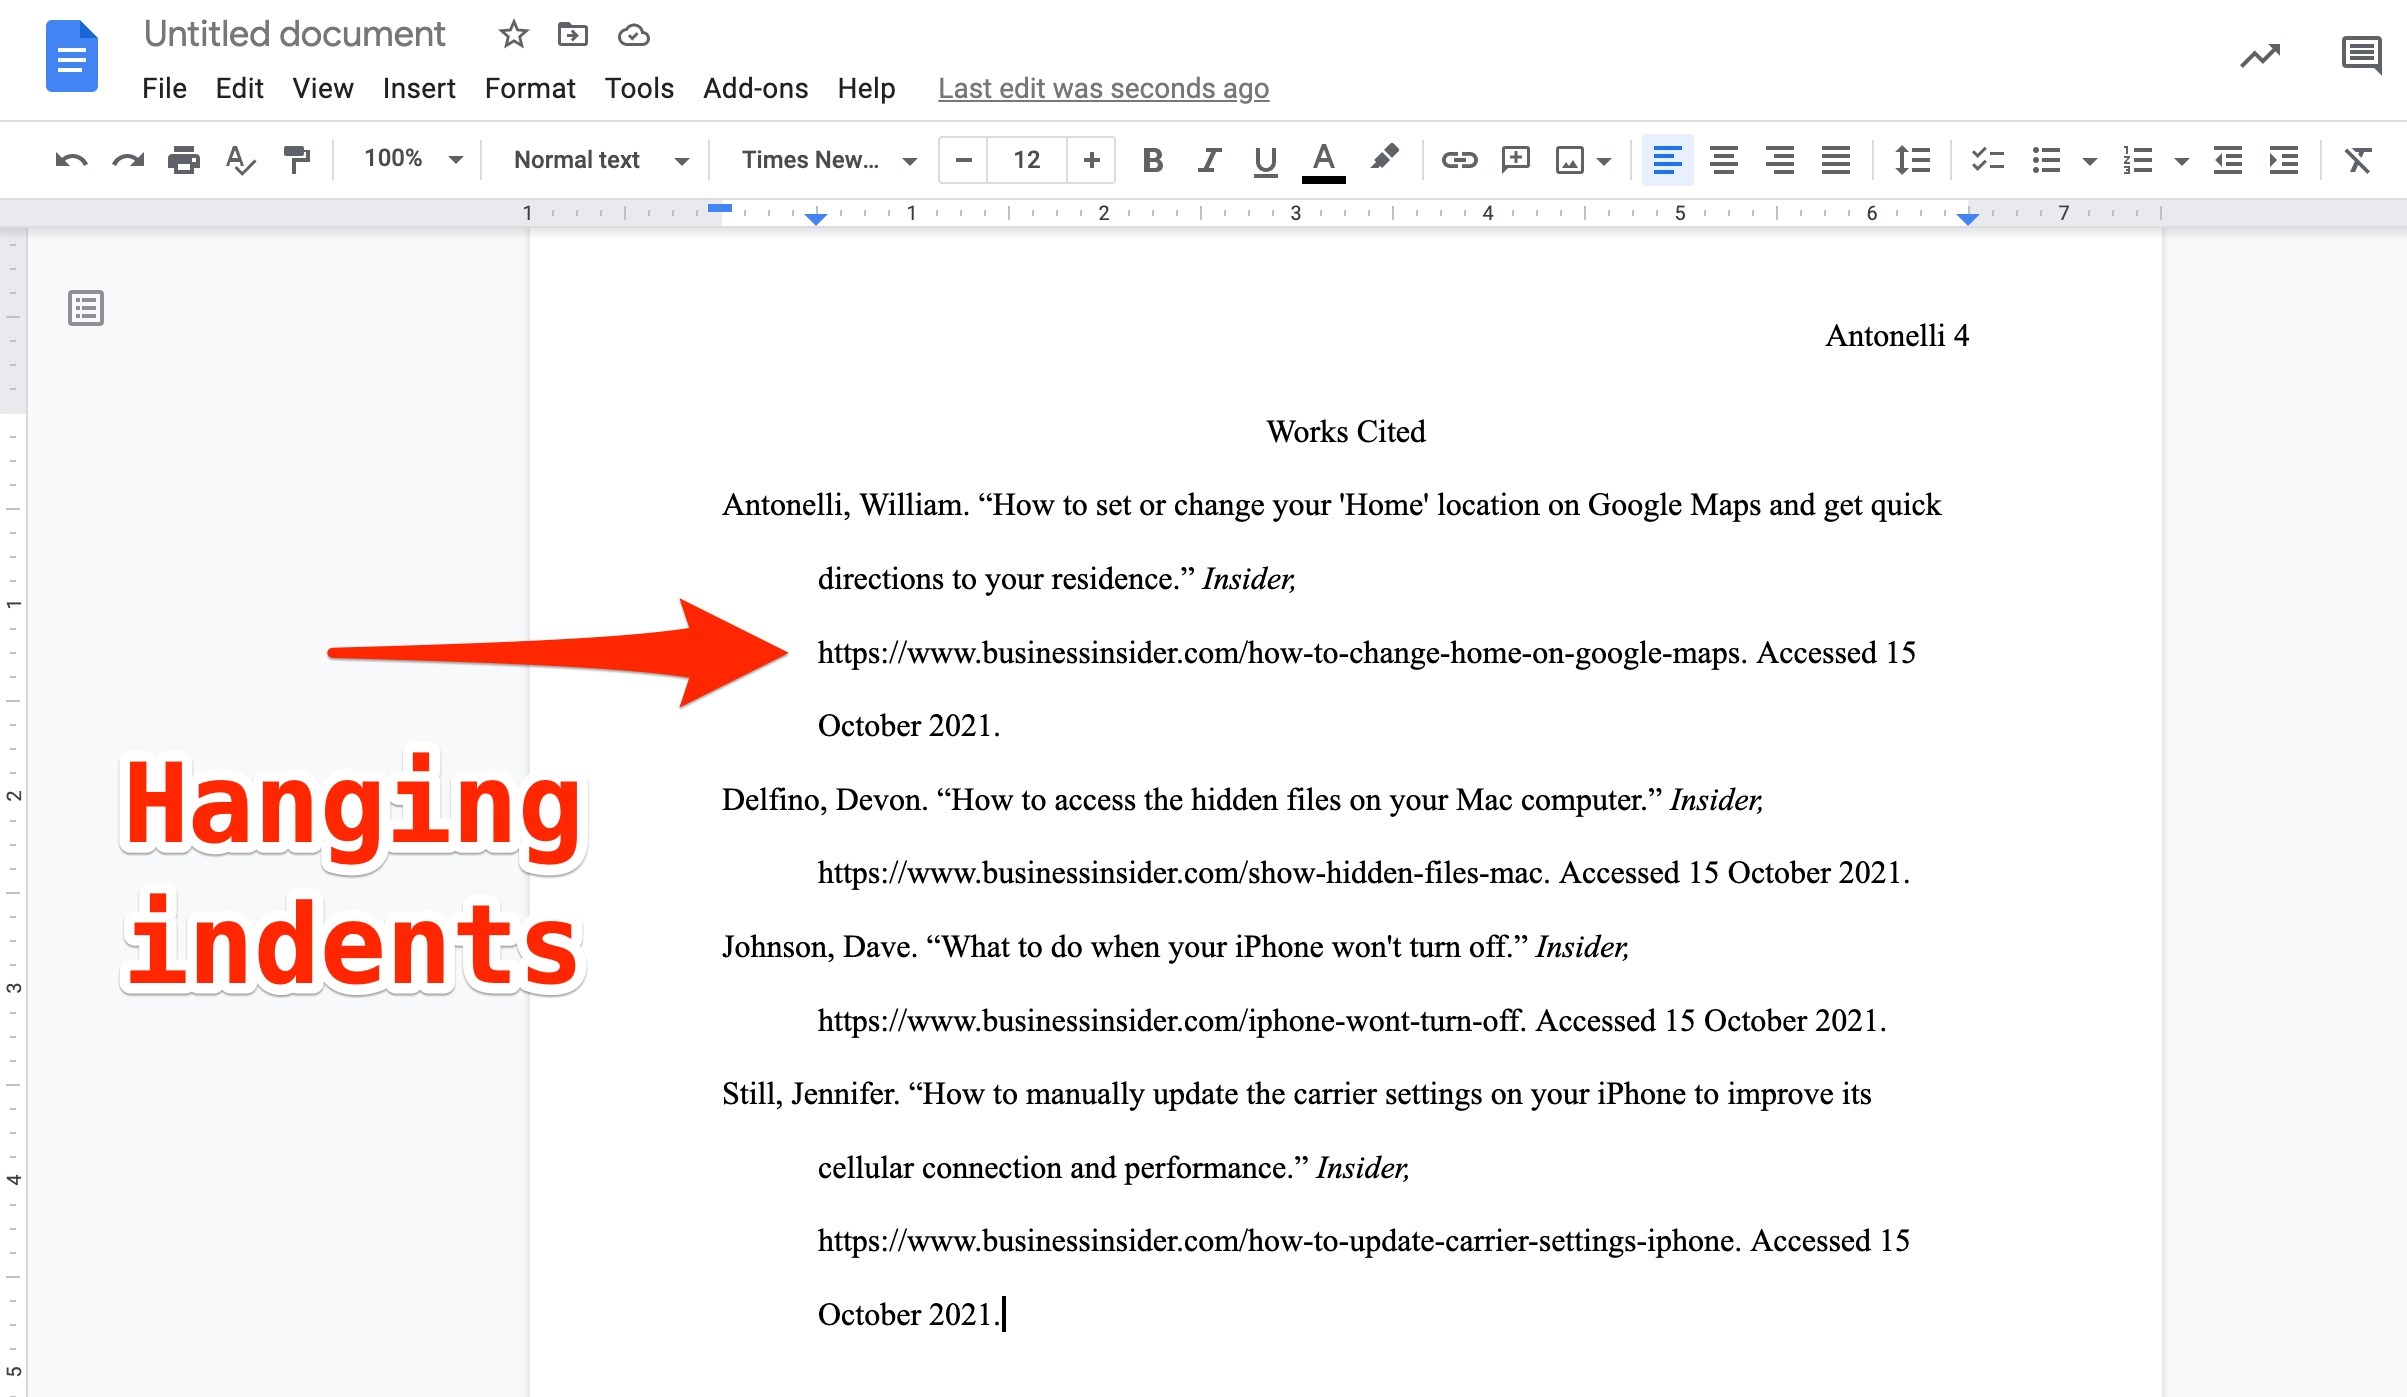 How To Write An MLA Format Paper In Google Docs Using A Template Or Other Built in Features